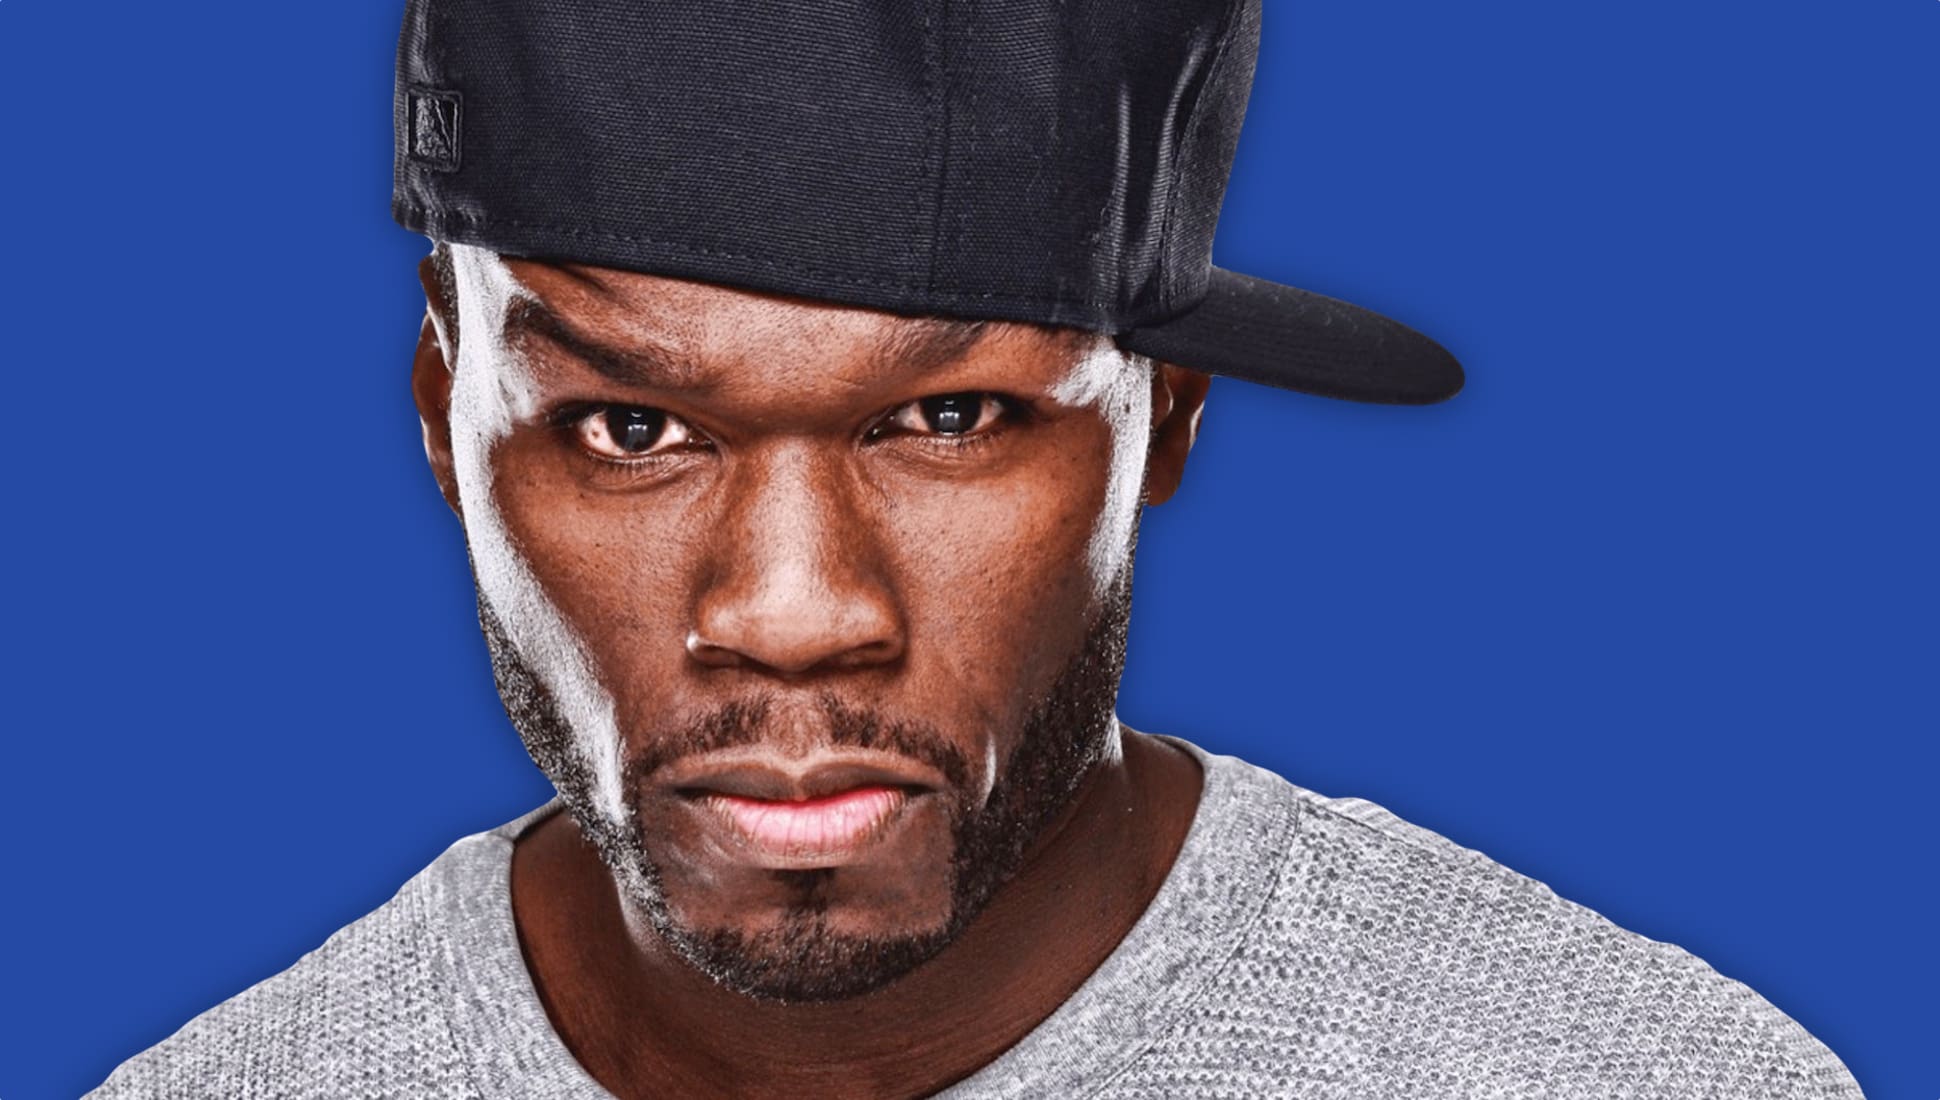 50 Cent Creates New Merch Inspired By The Rapper Who Pressed Him